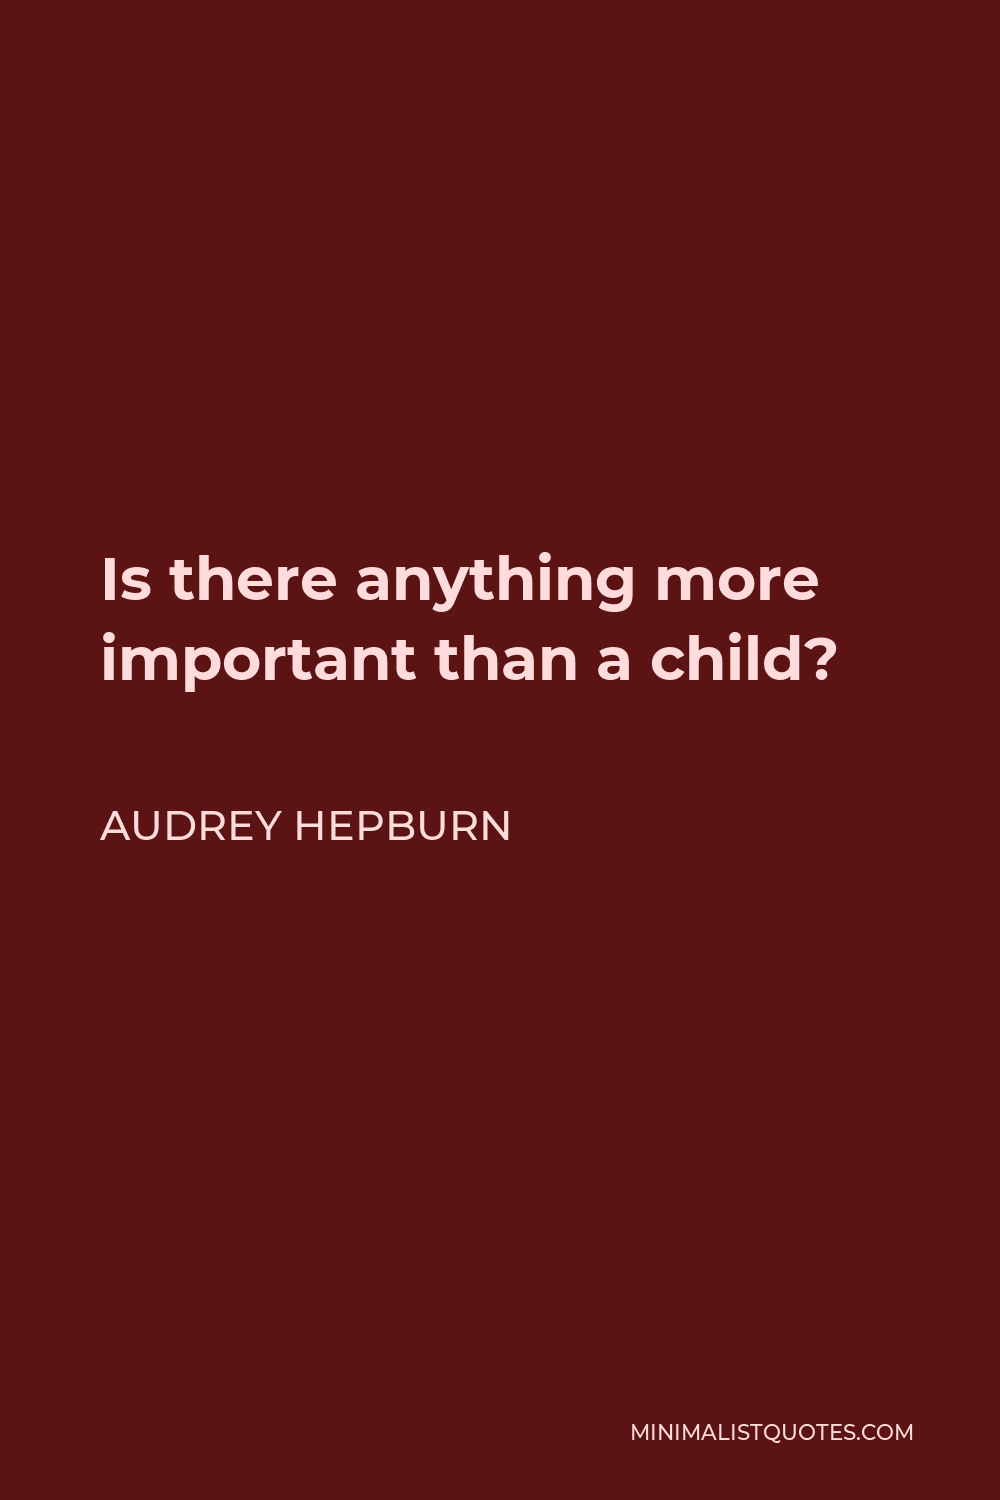 Audrey Hepburn Quote - Is there anything more important than a child?